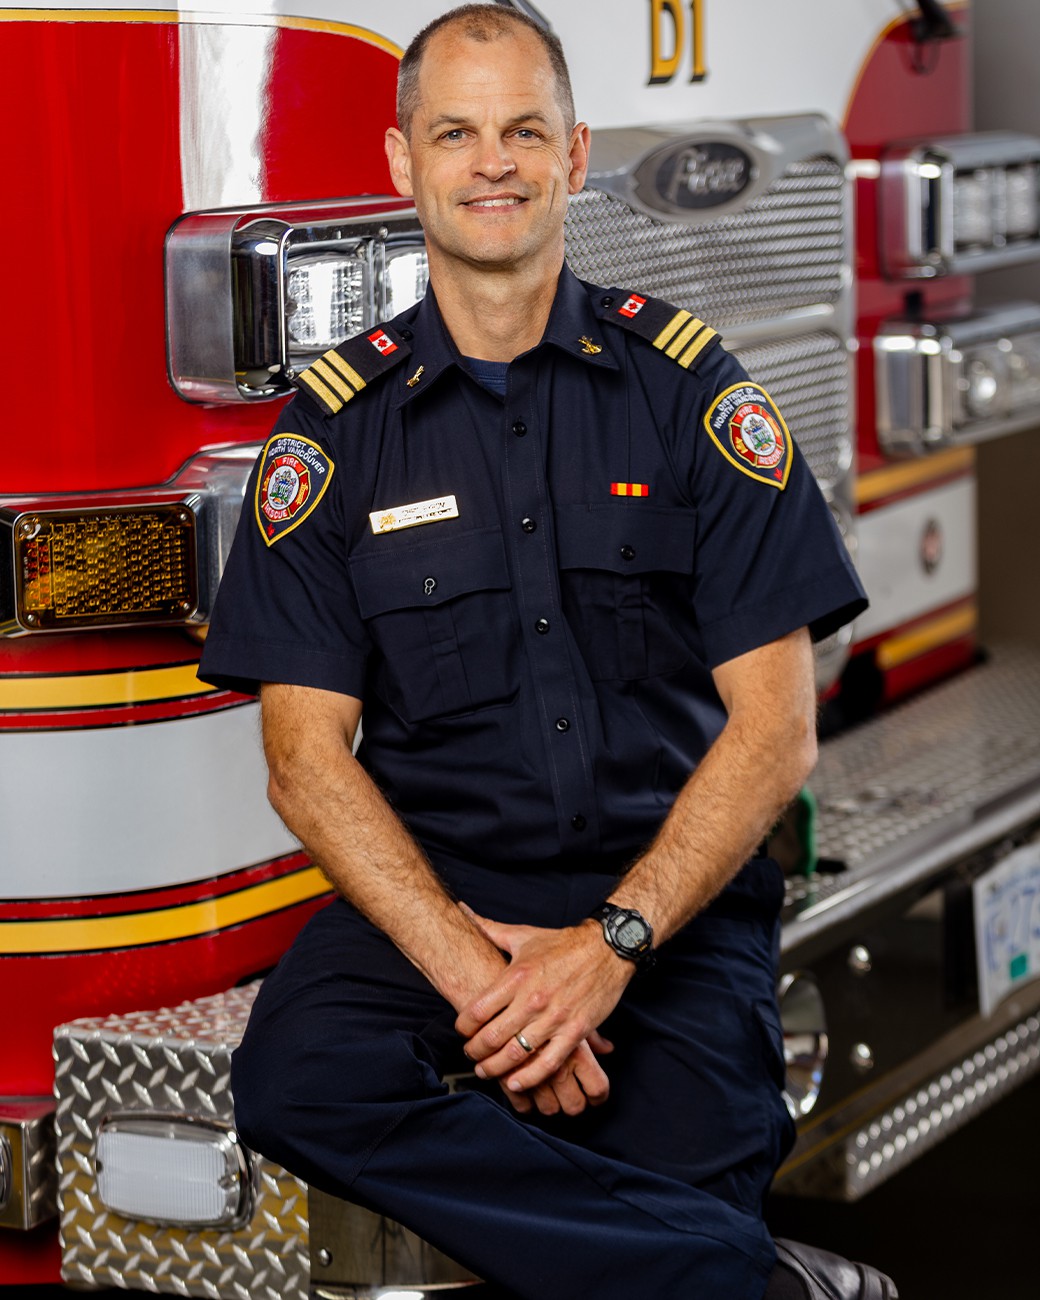 Assistant Fire Chief – Operations, Chris Byrom